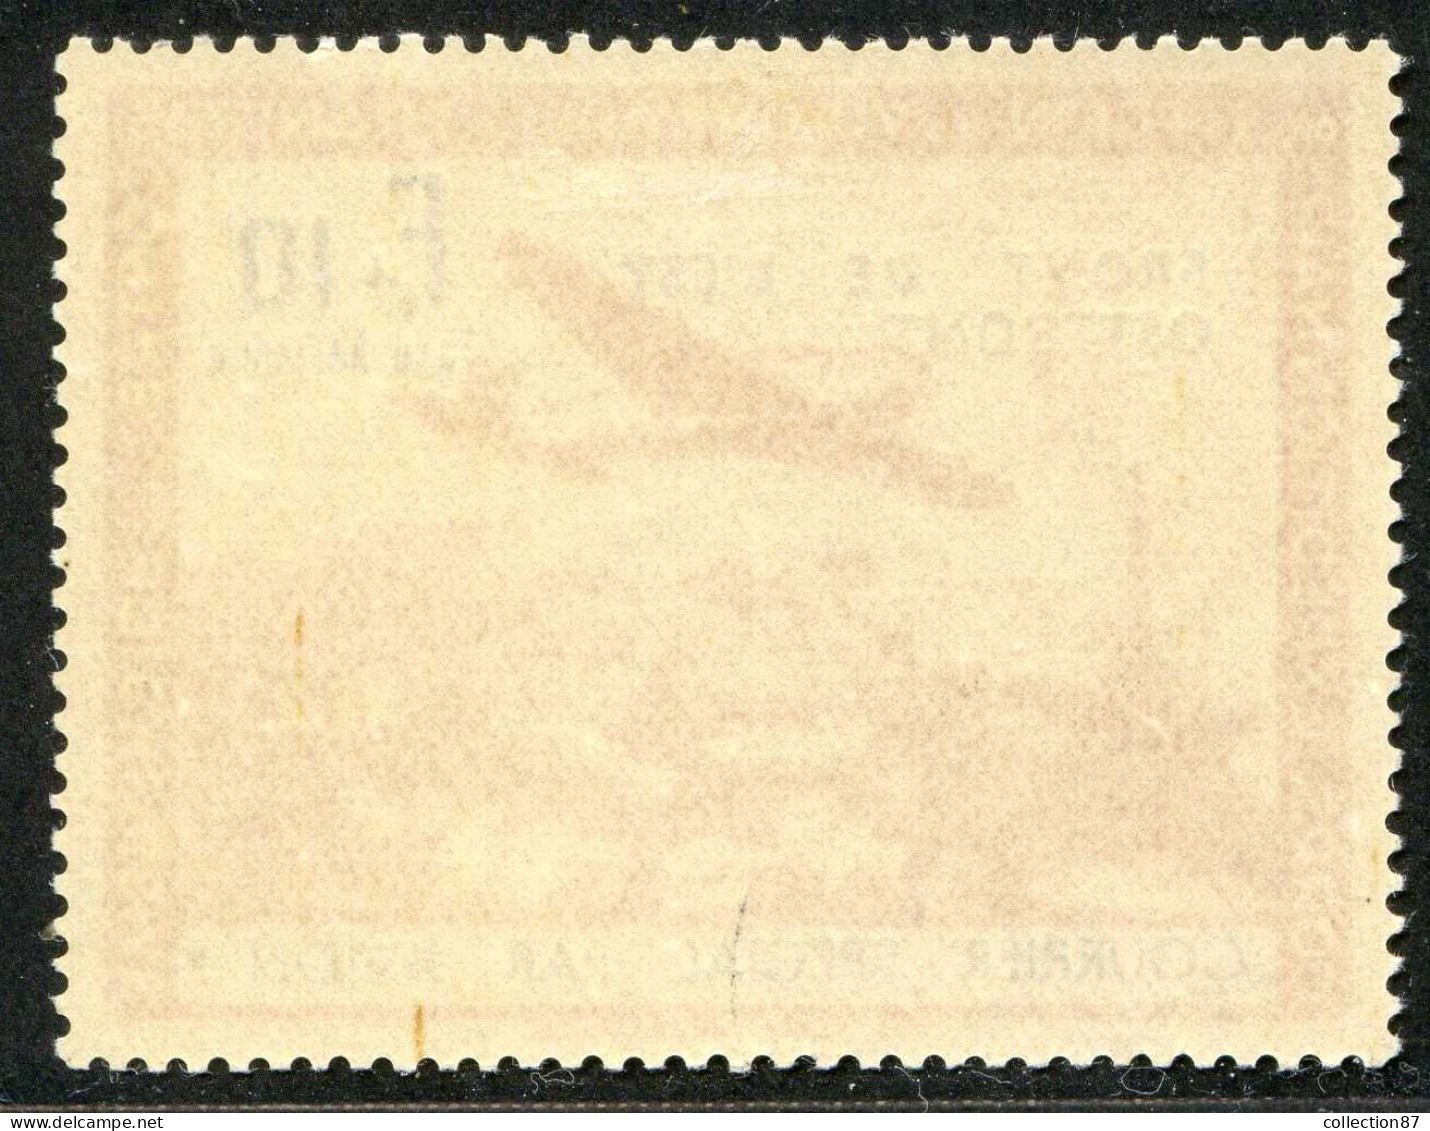 REF093 > FRANCE LVF < Yv N° 5 * Neuf Dos Visible - MH * - Aviation Avion Bombardier - War Stamps